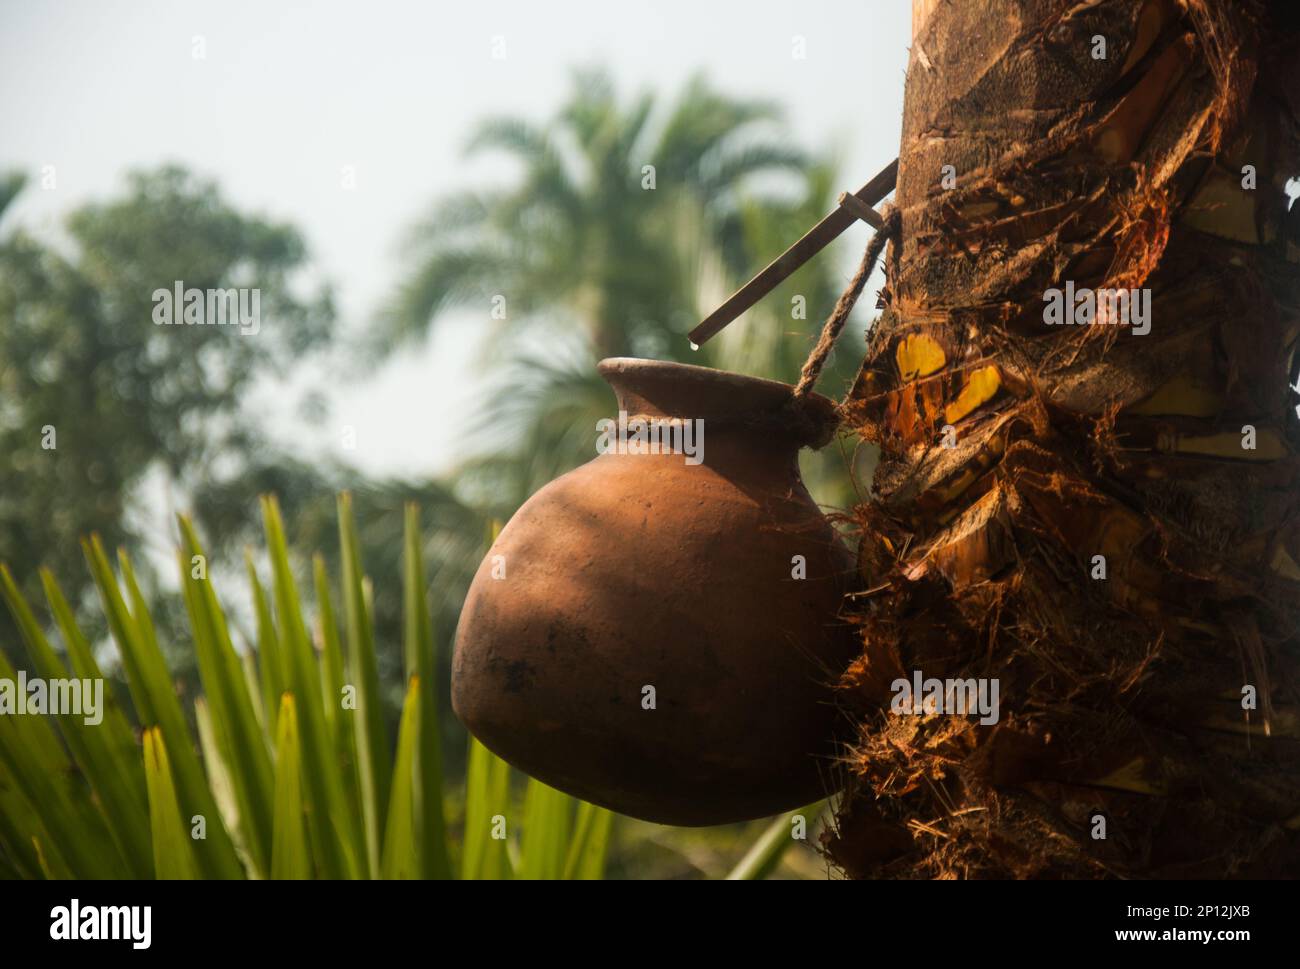 Picture of date's juice (khejurer rosh) collection from tree in Bangladesh. Stock Photo